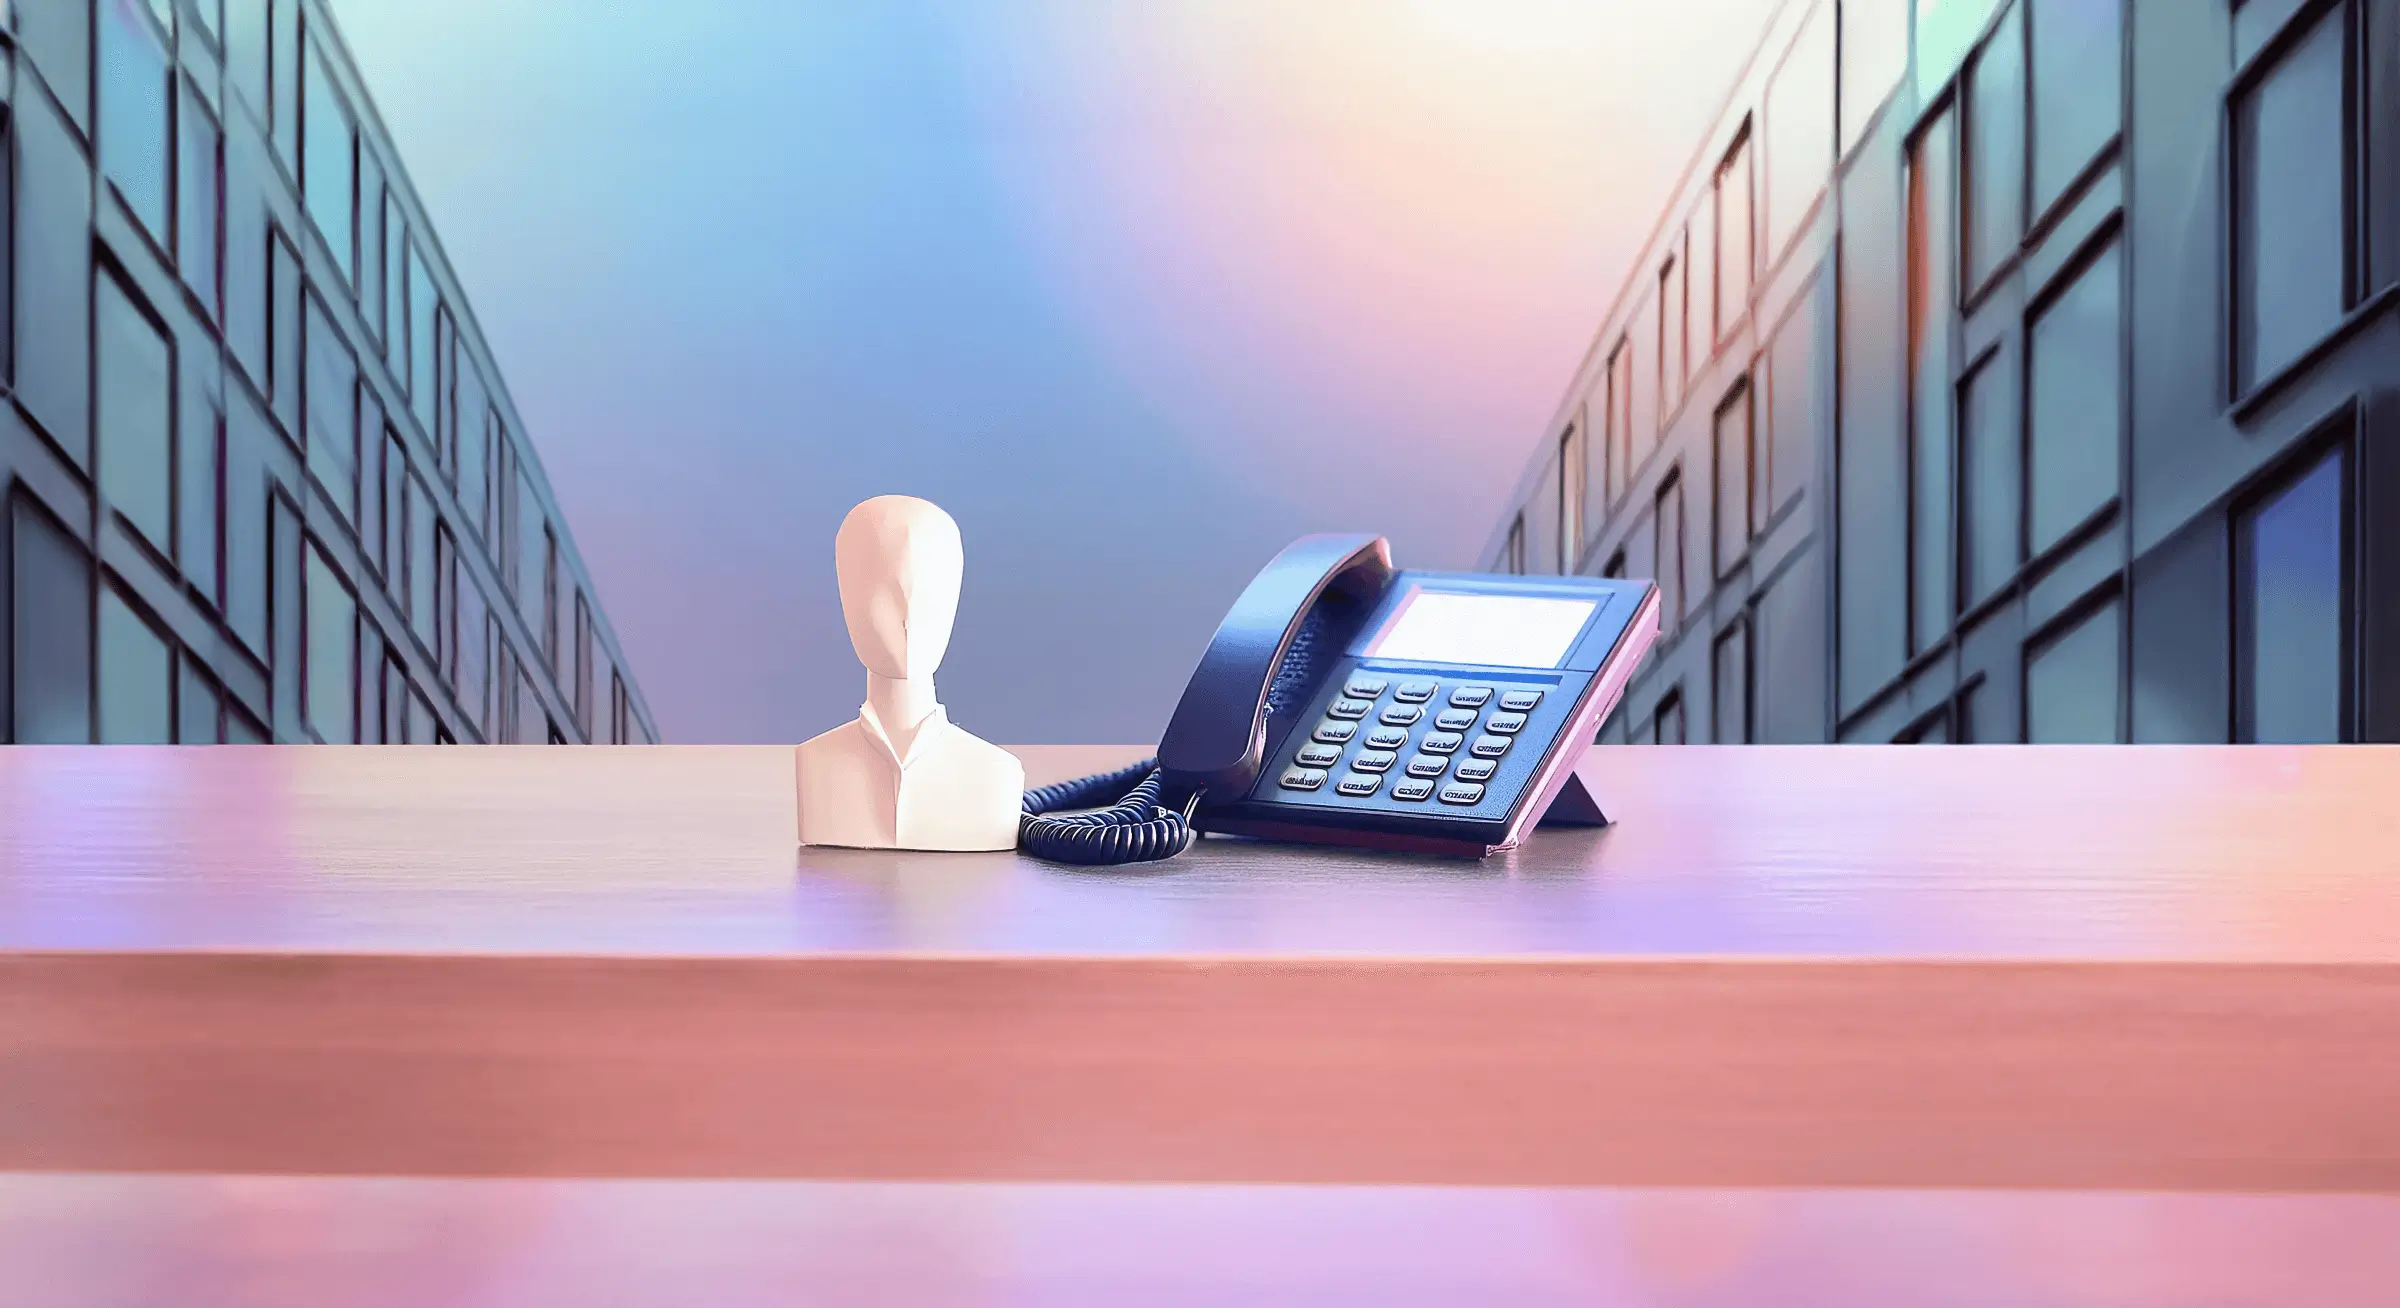 Illustration of a desk and a human sculpture figure representing Voice AI agency in a small business environment